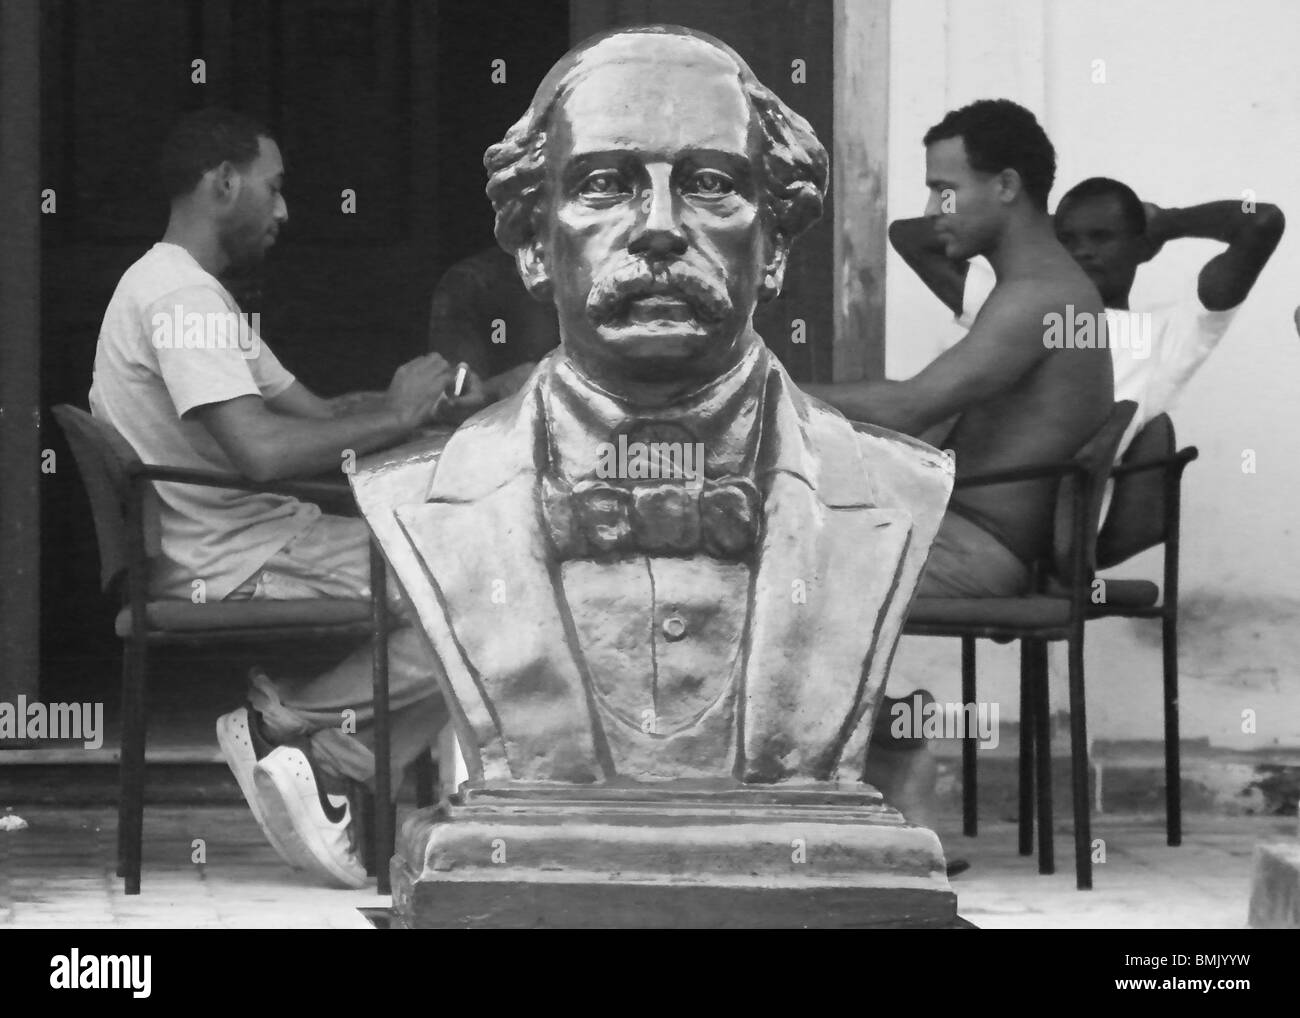 Men play a game behind a bust of independence hero Juan Pablo Duarte in Puerto Plata, Dominican Republic Stock Photo